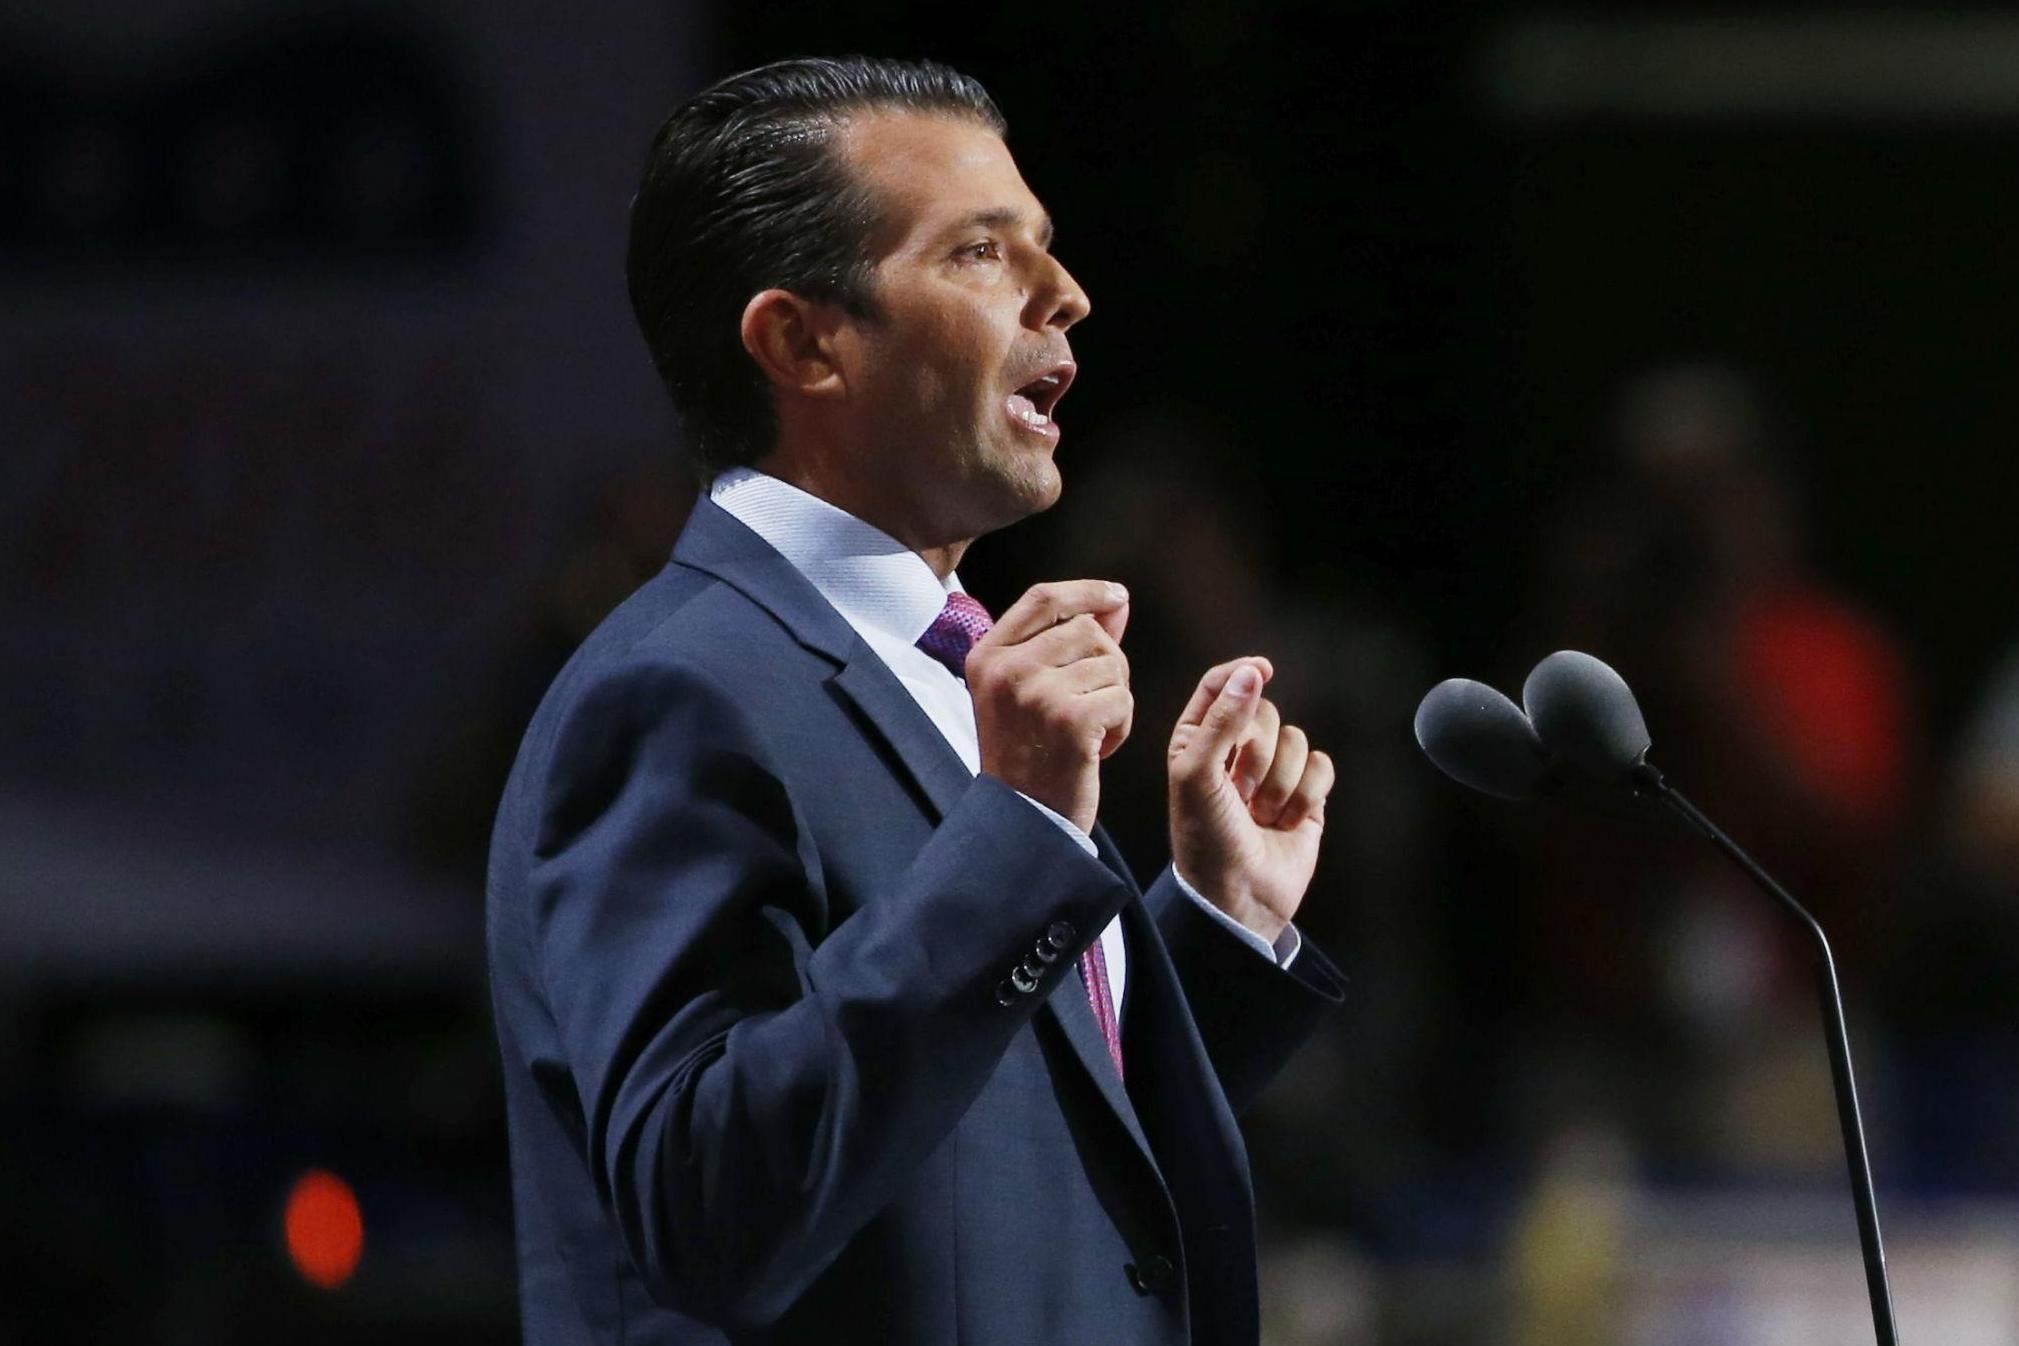 Donald Trump Jr speaking at the Republican convention in Cleveland in July